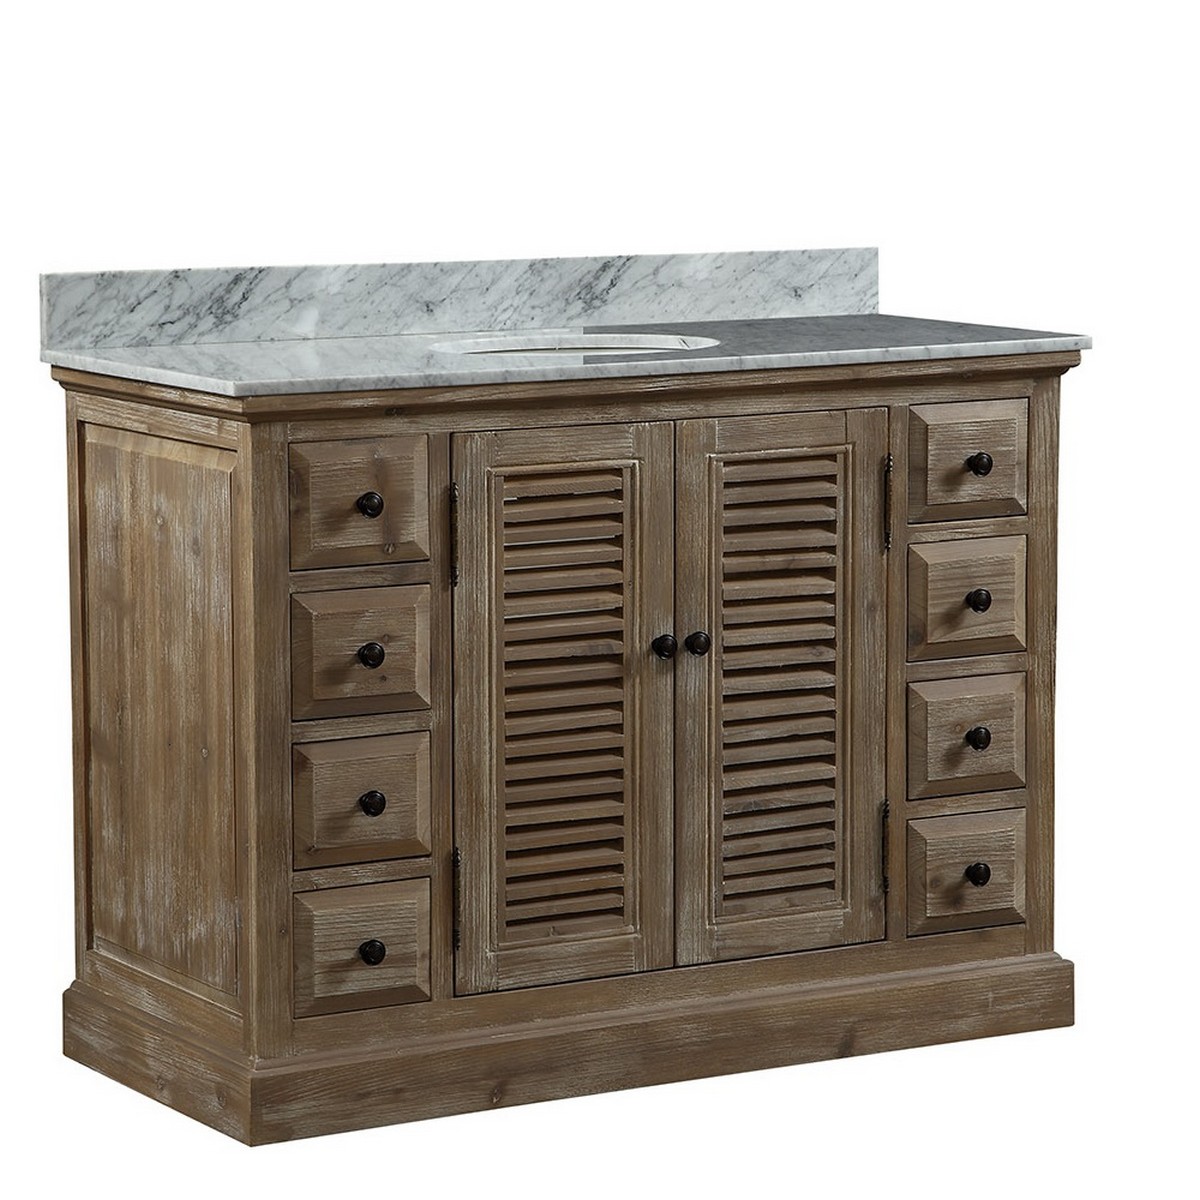 INFURNITURE WK1948+CW TOP 48 INCH SOLID WOOD SINGLE SINK VANITY WITH CARRARA WHITE MARBLE TOP